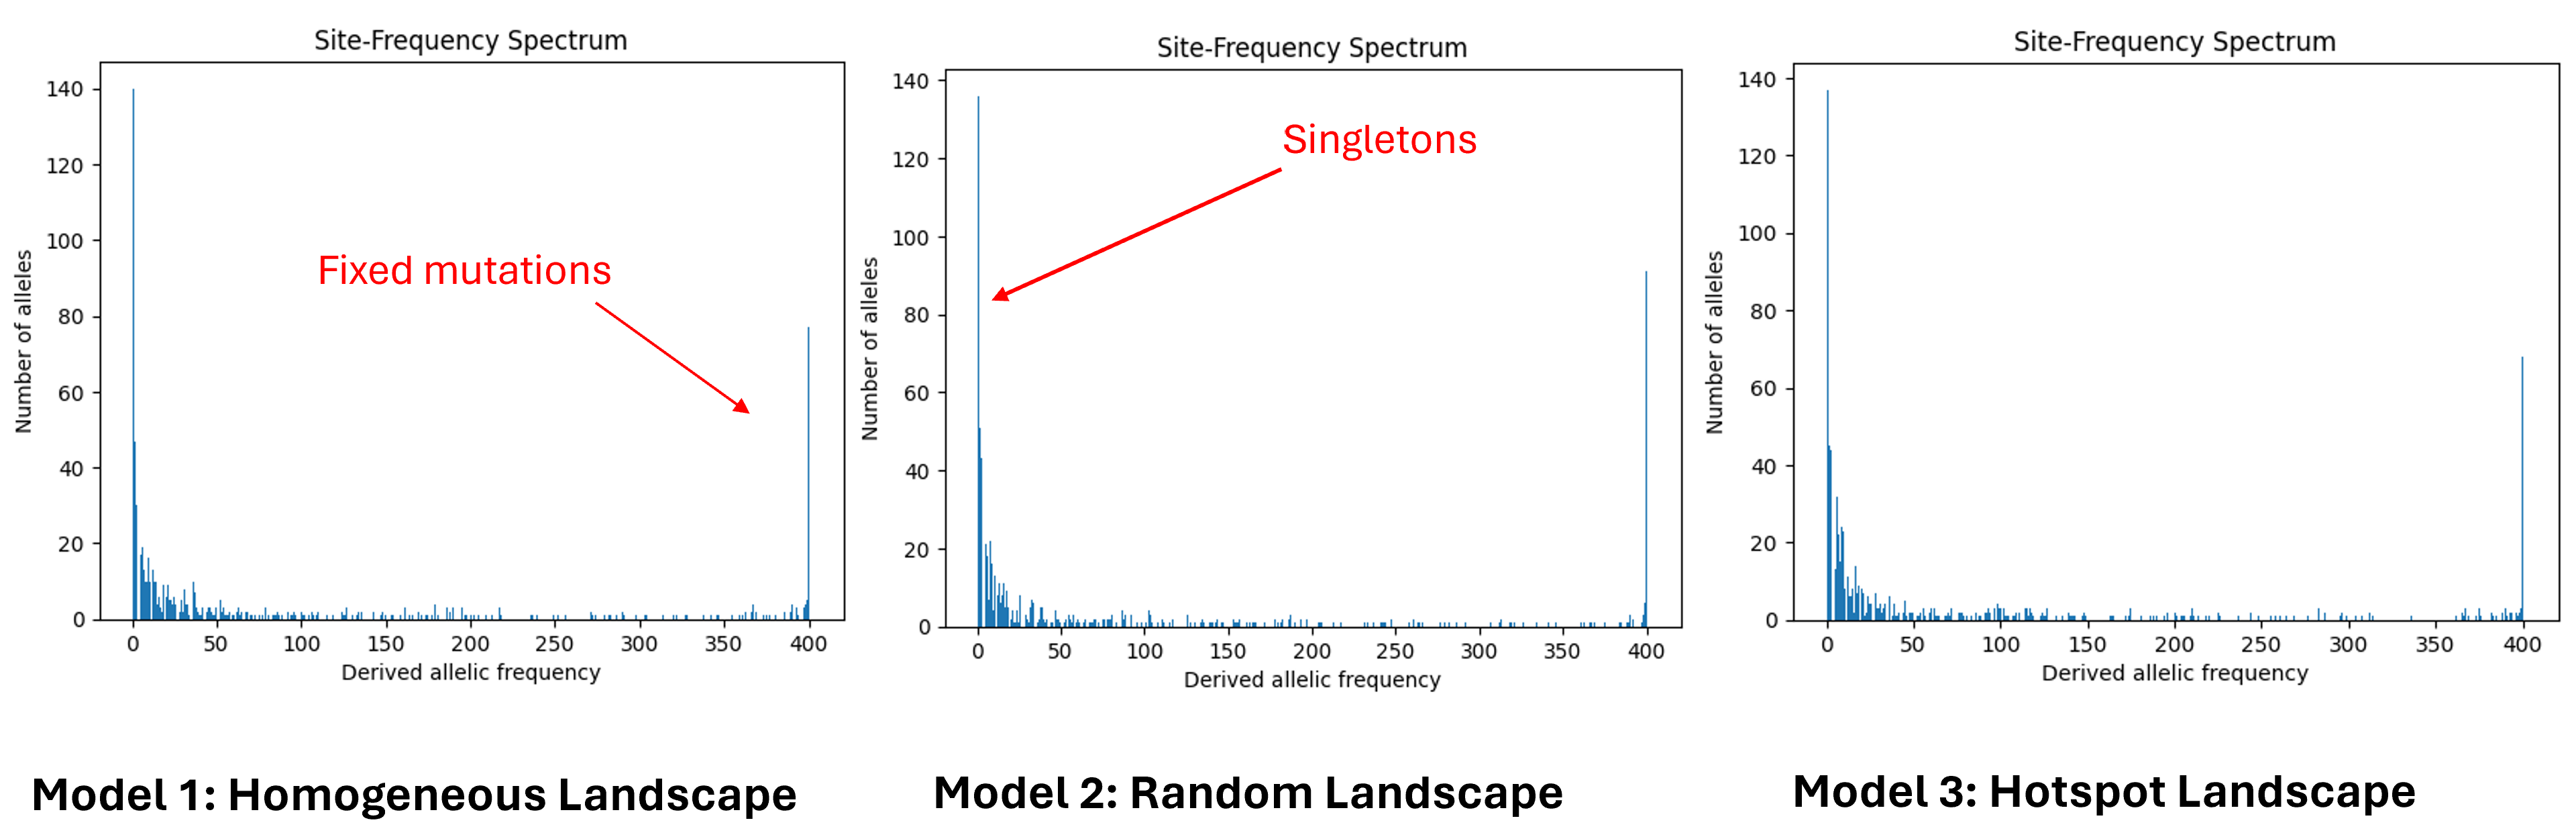 Site Frequency Spectrum (SFS)